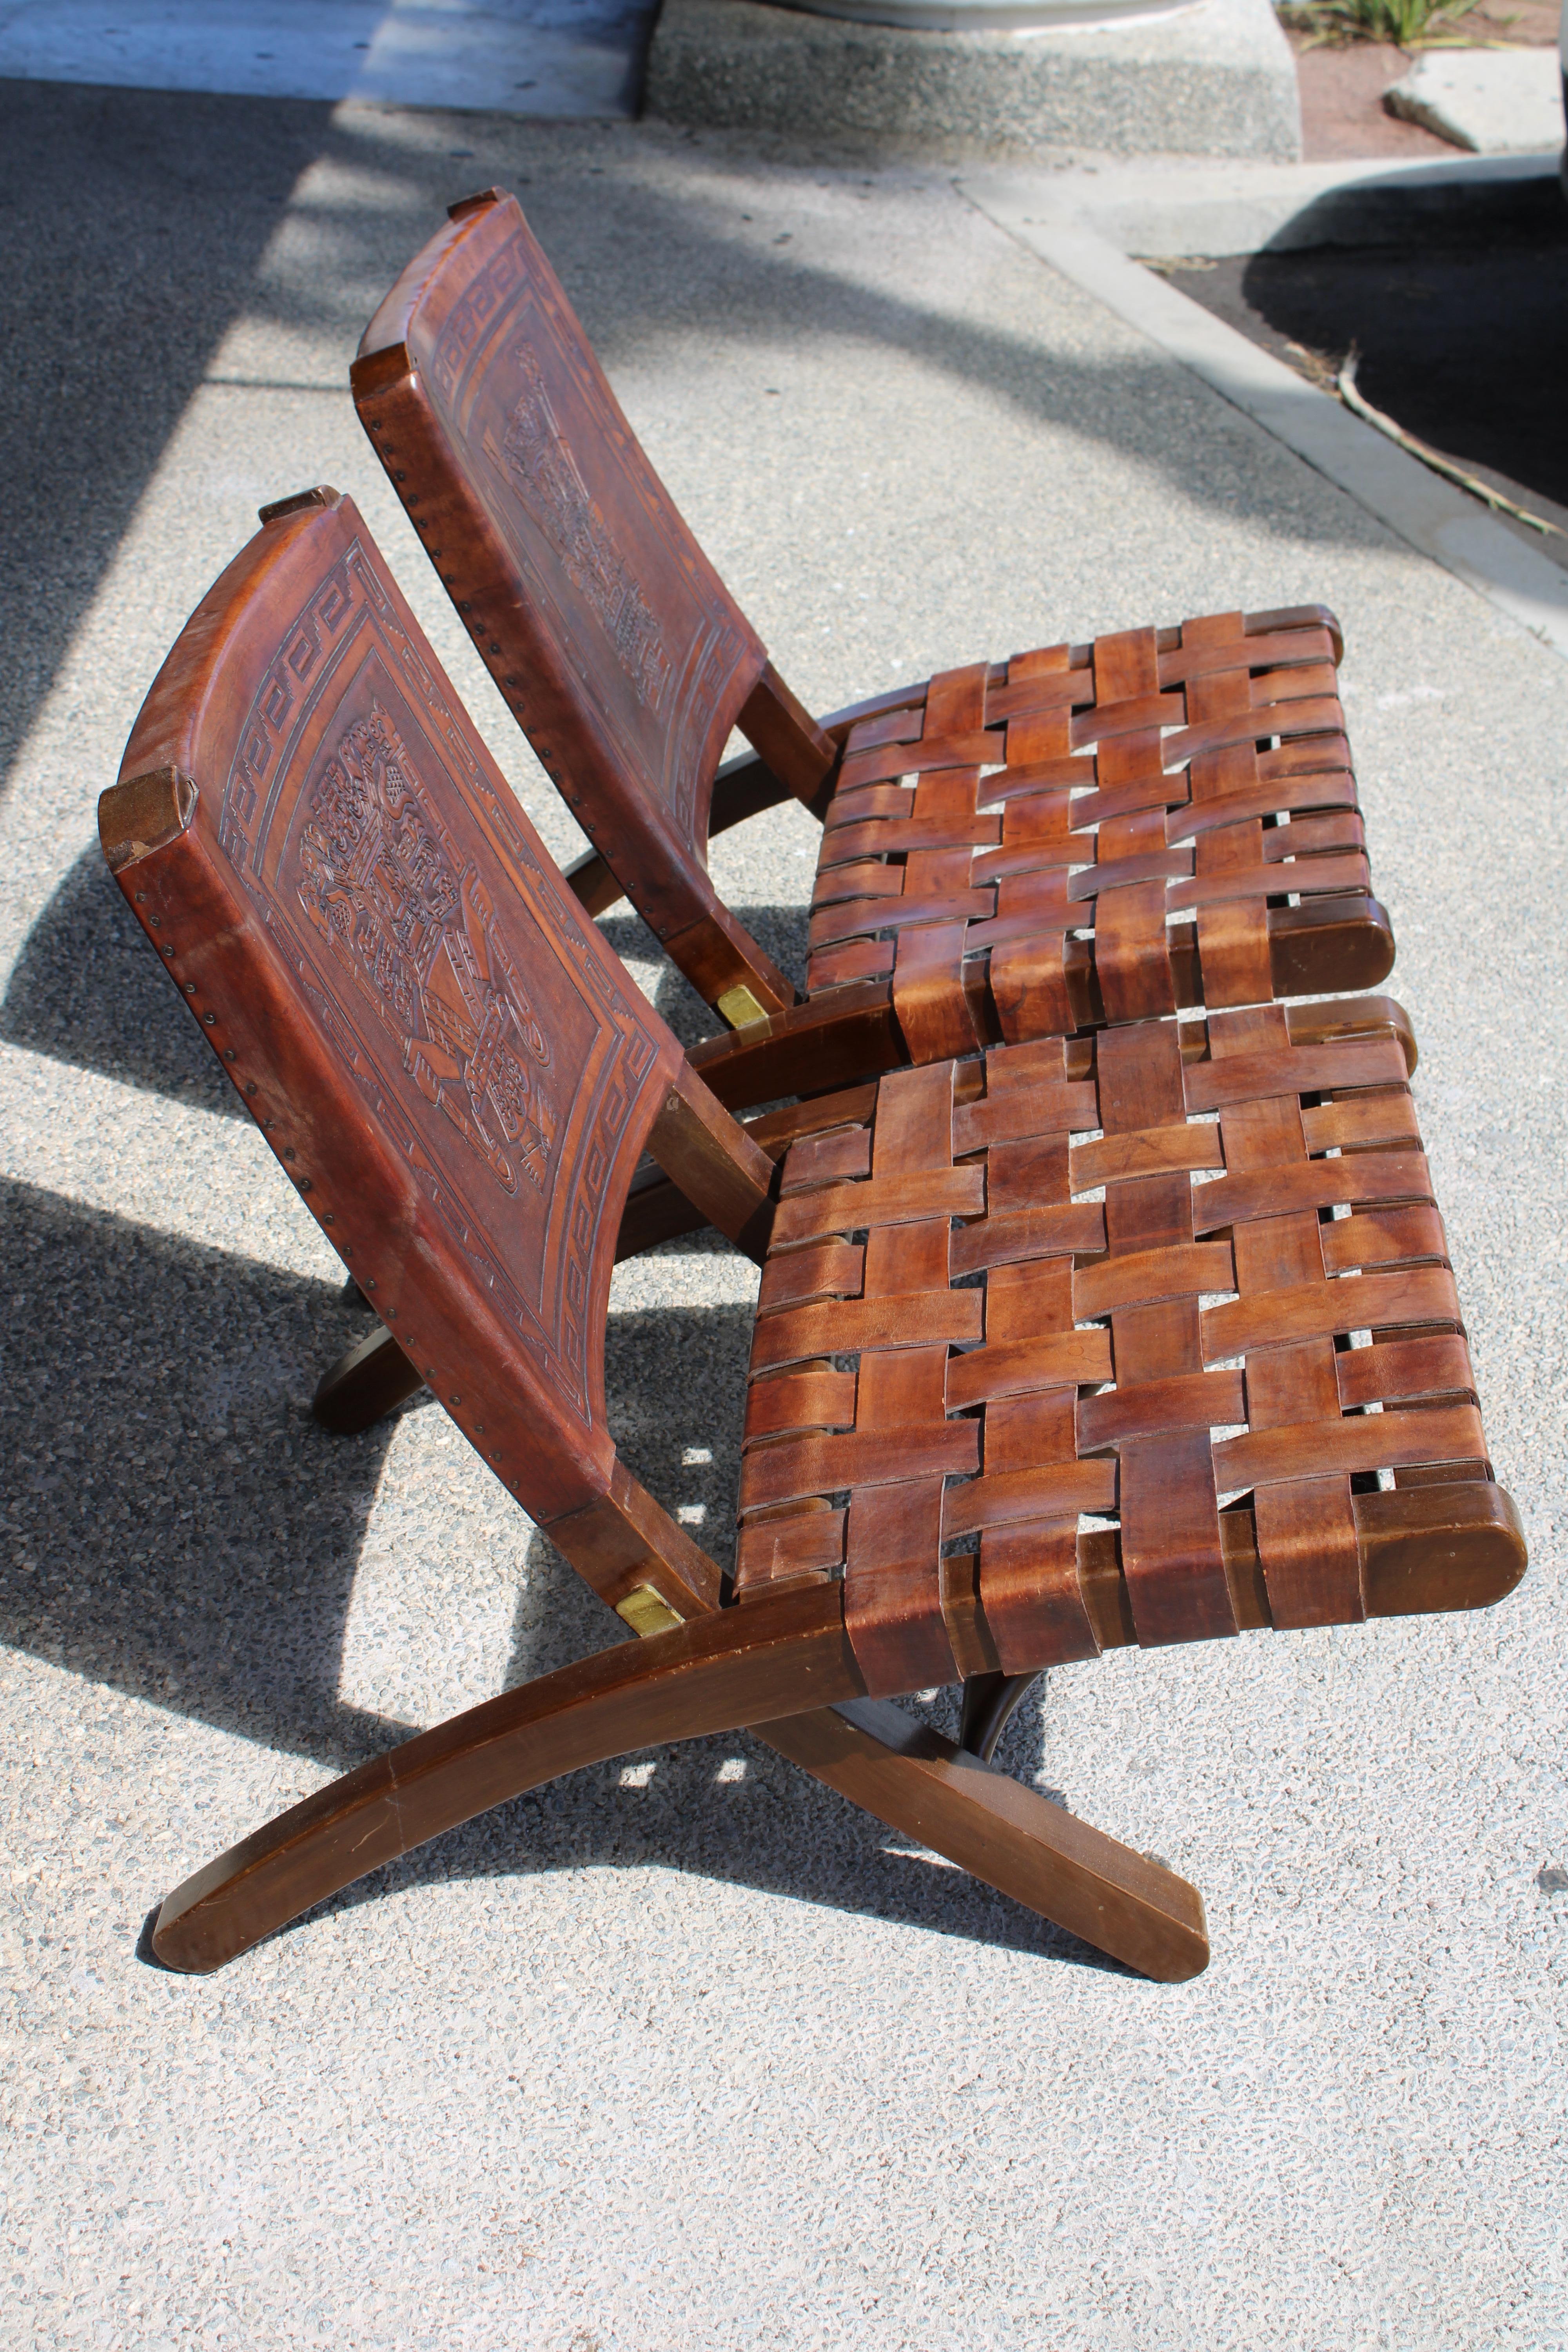 Pair of folding chairs by Angel Pazmino for Muebles De Estilo, Ecuador, circa 1960's. Wood frames with thick saddle leather backs embossed with Incan or Aztec designs. Seats are done in a woven piecrust pattern. Solid brass hinges. Chairs measure